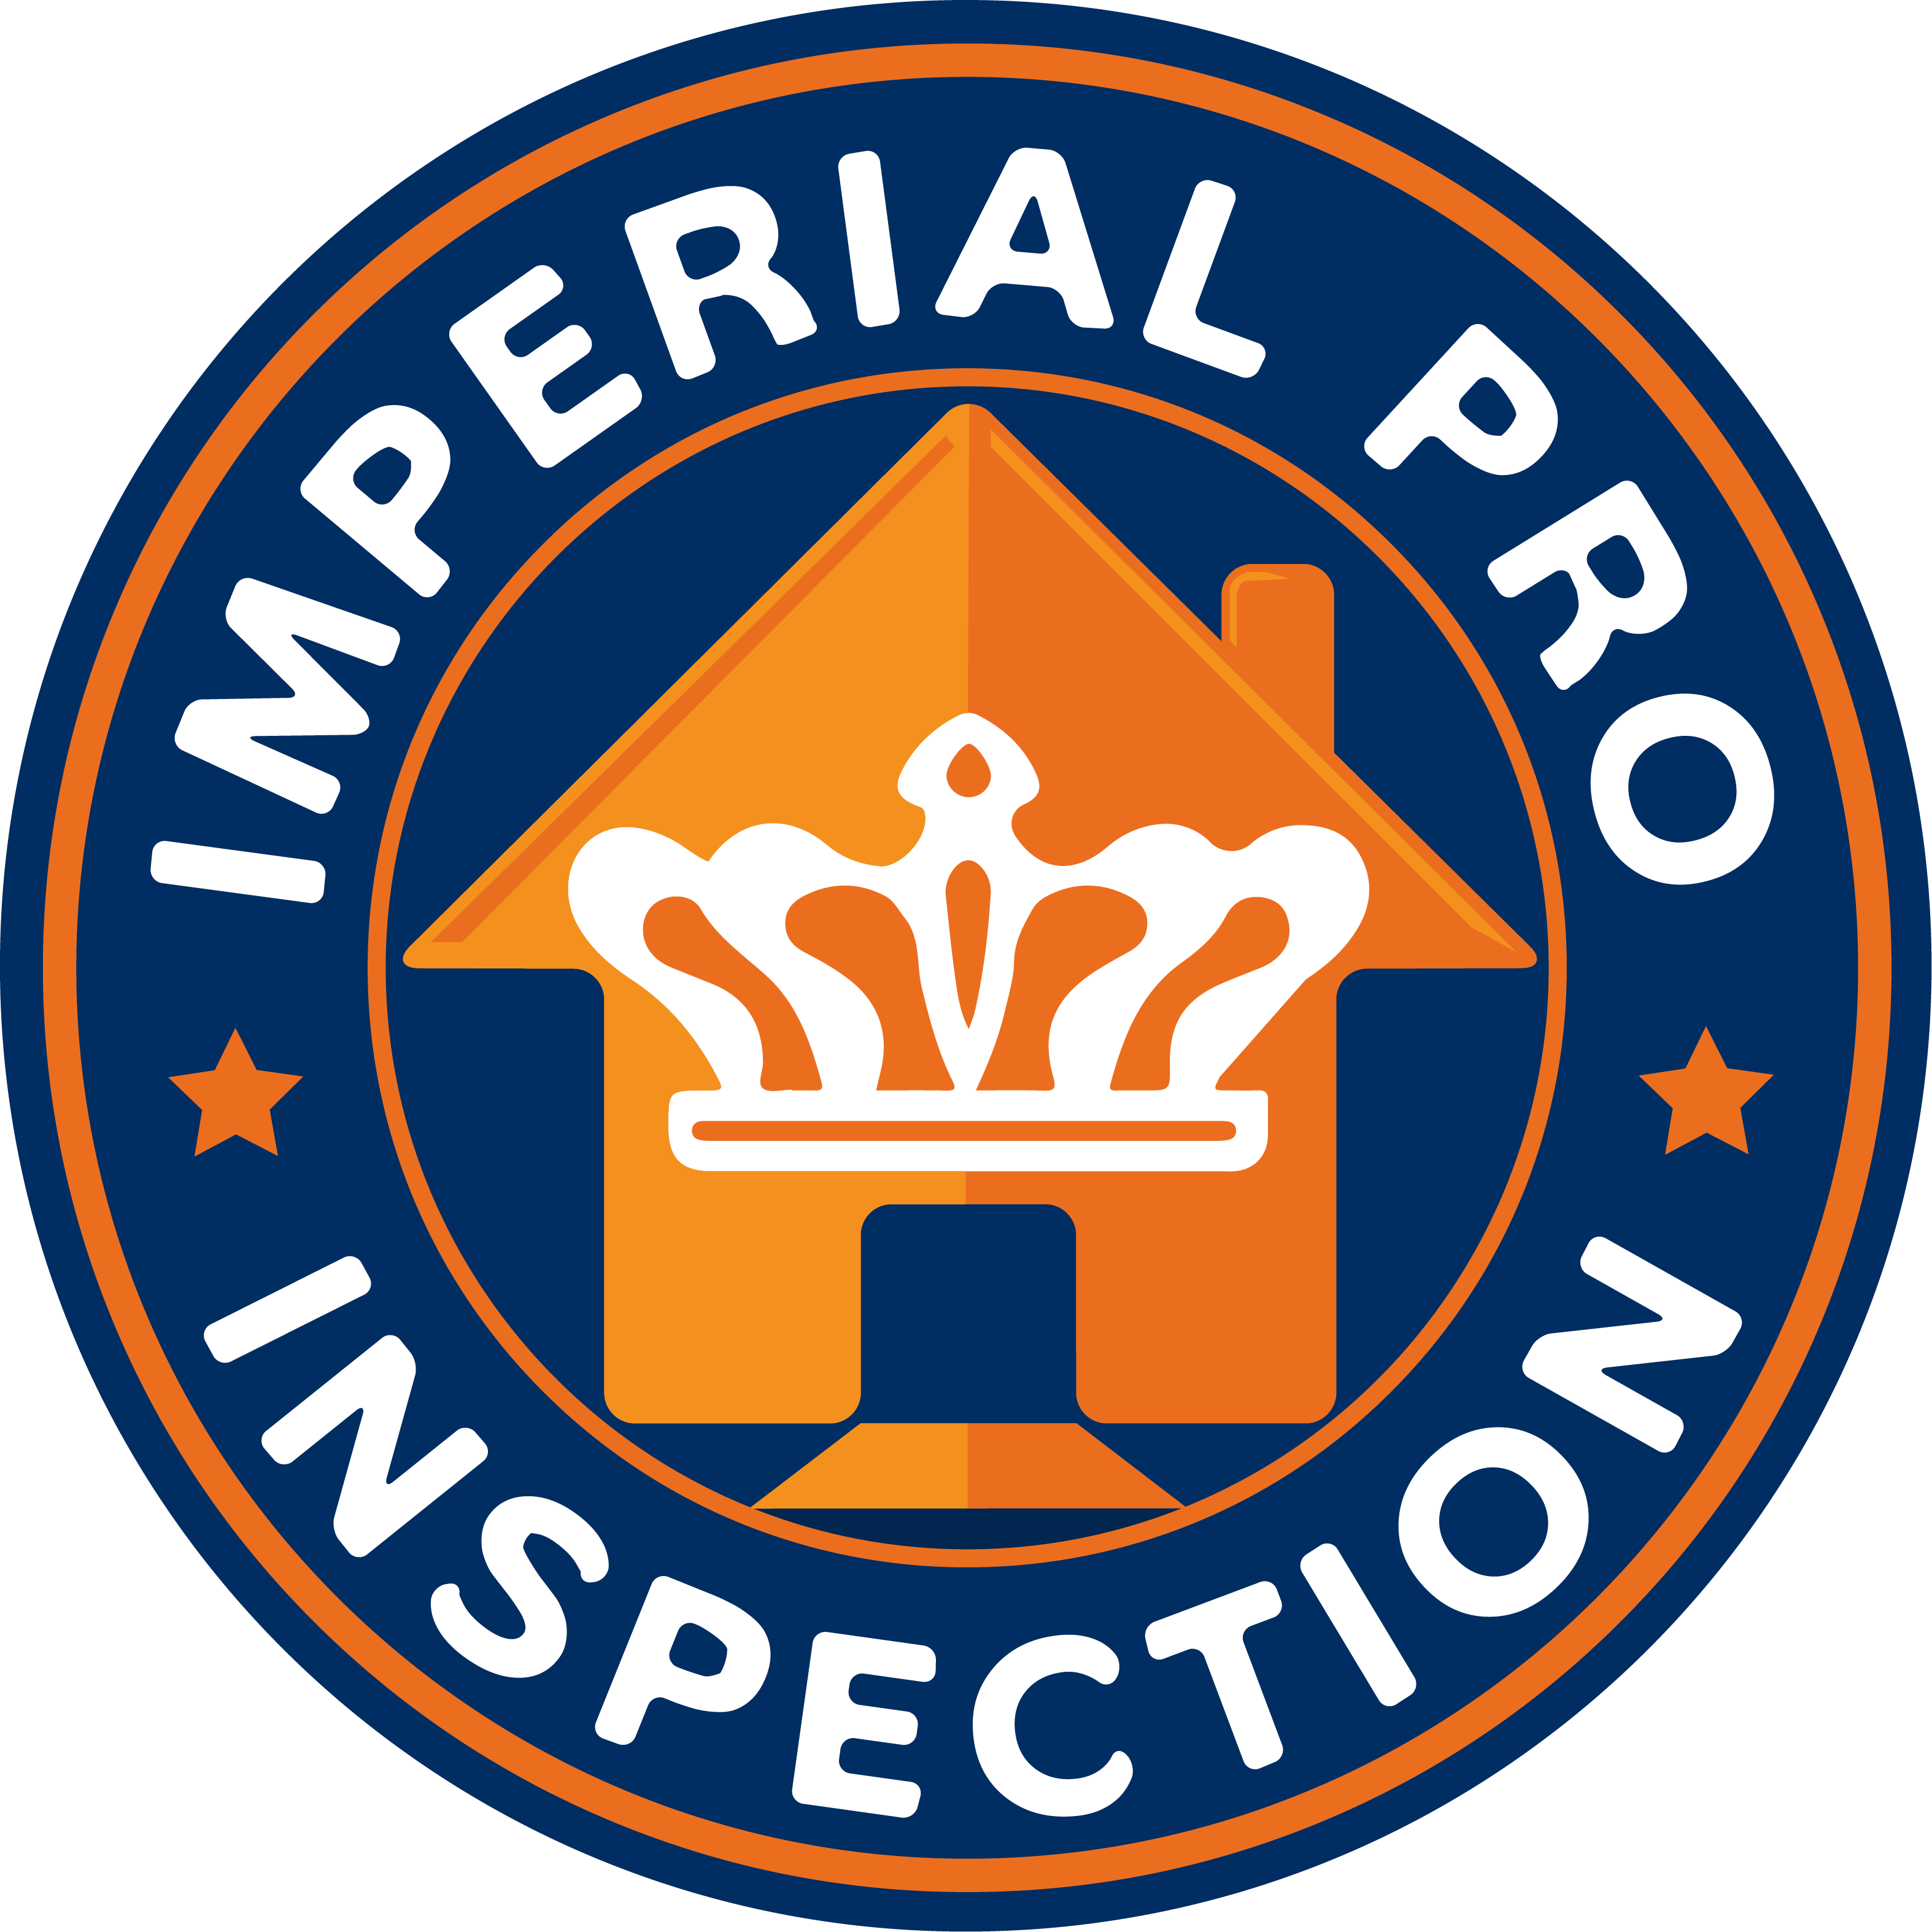 About Imperial Pro